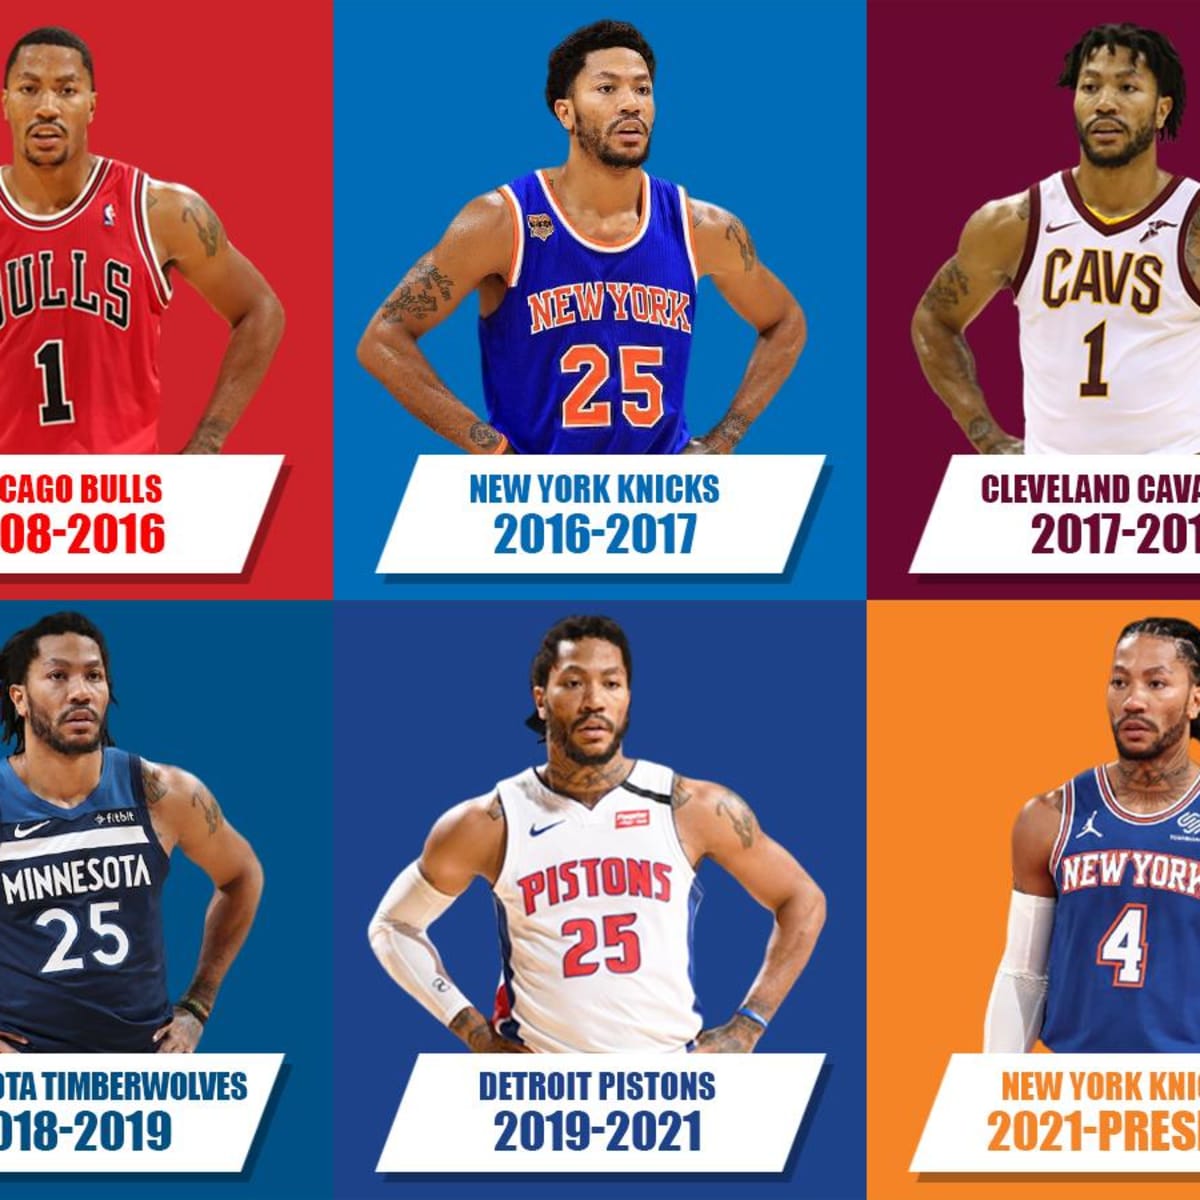 How good was Derrick Rose in NCAA basketball? We take a look at